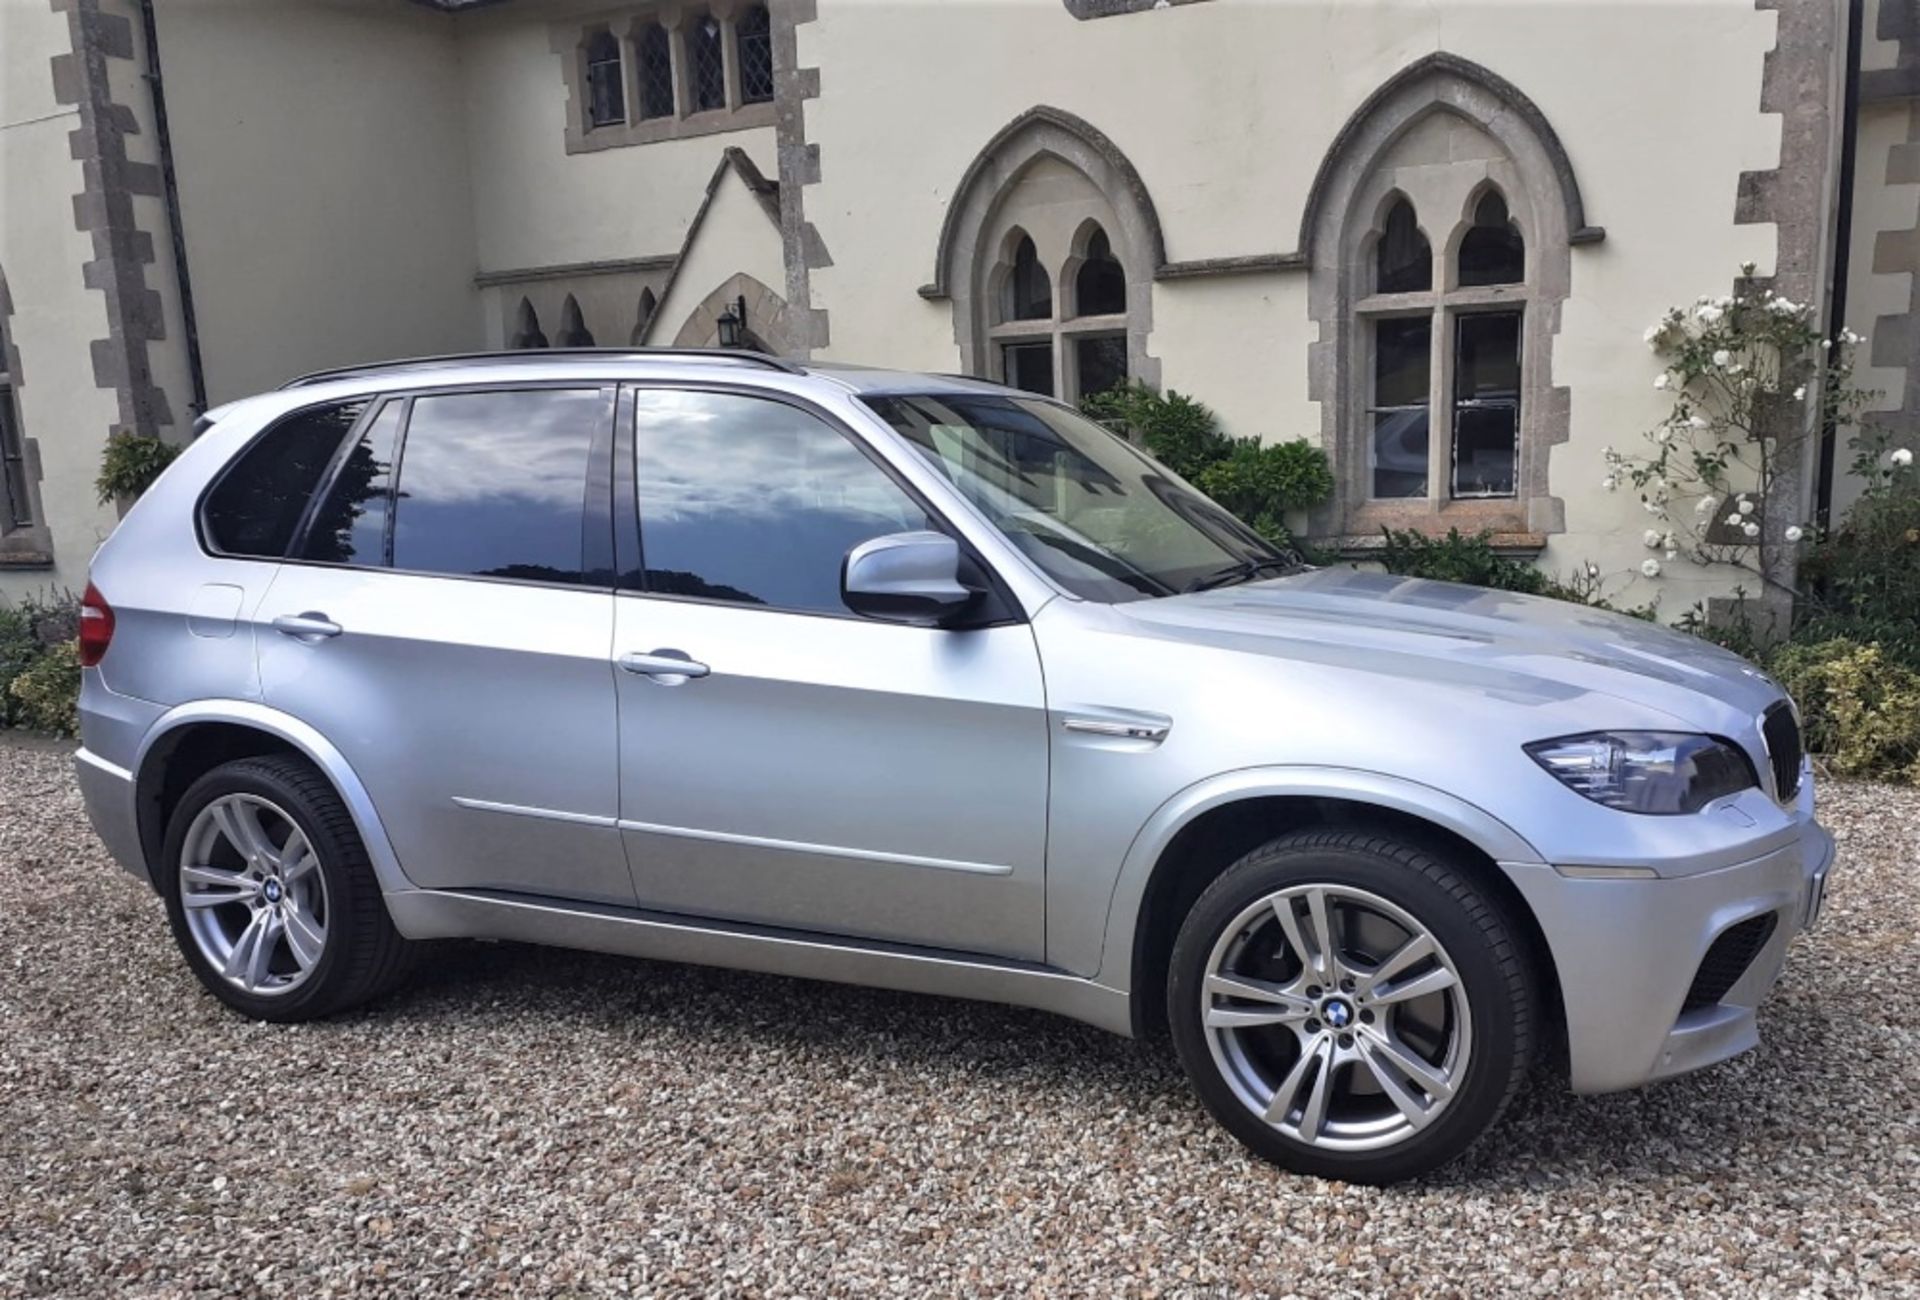 2009 BMW X5 M Registration Number:YH59 FFM Chassis Number: TBA Recorded Mileage: 125,000 miles - Two - Bild 2 aus 17